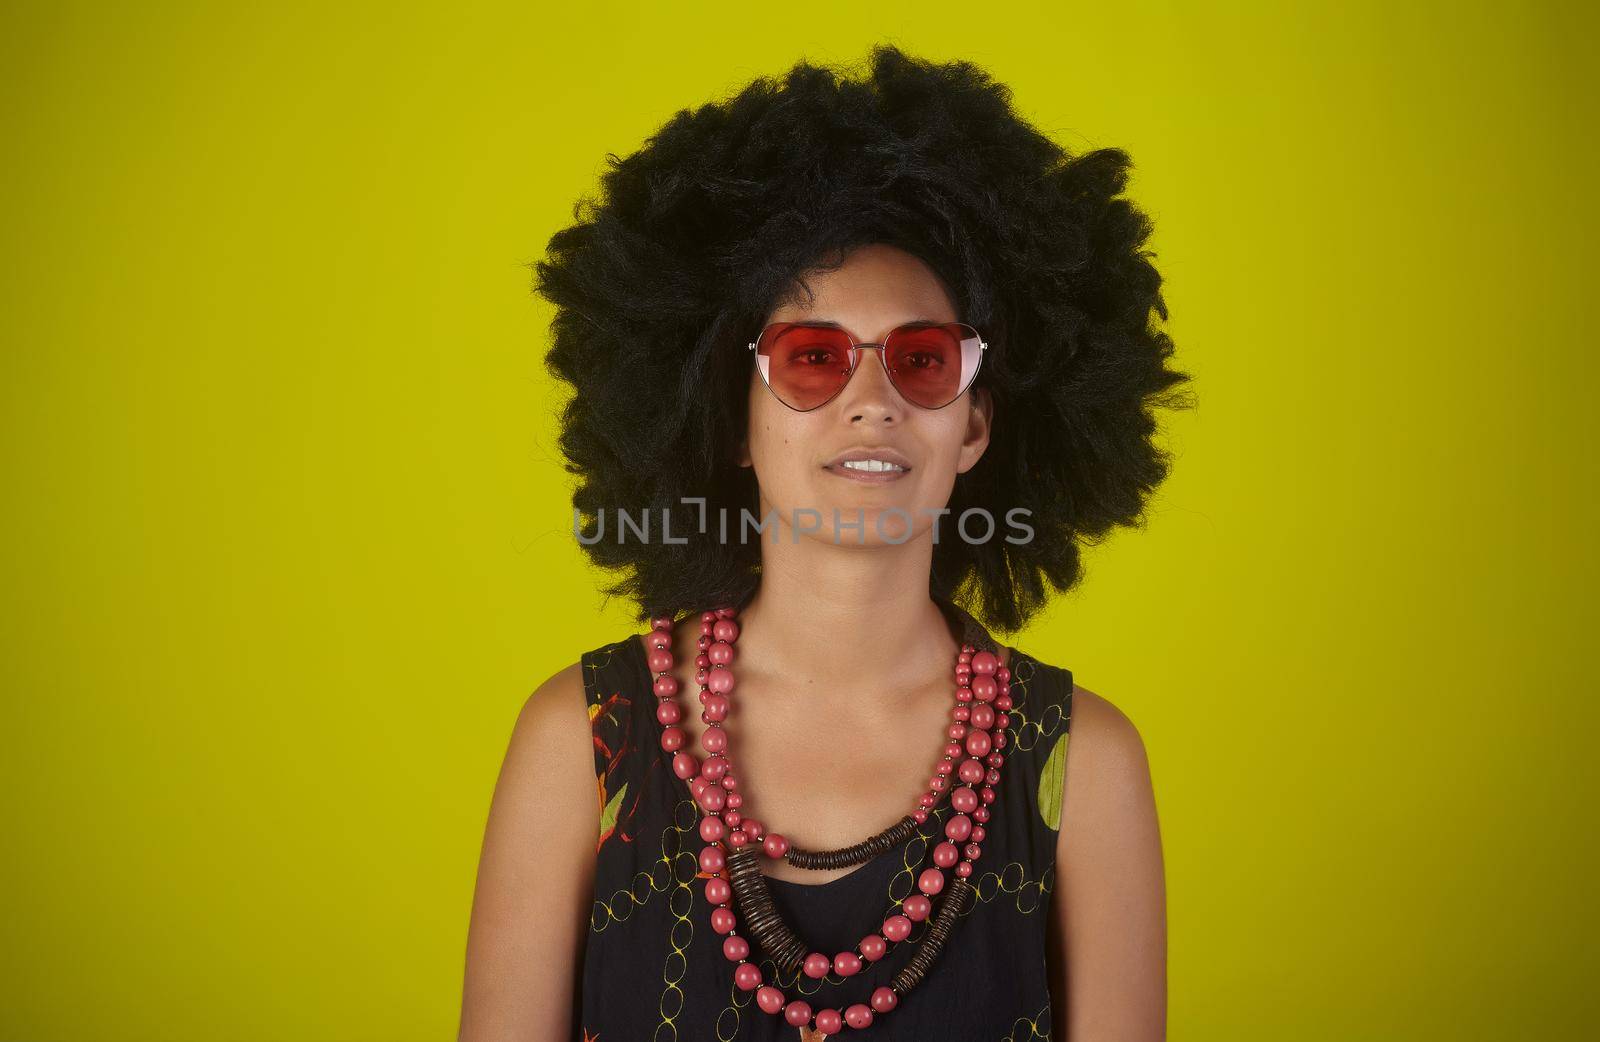 Portrait of a smiling woman with afro curly hairstyle on yellow background